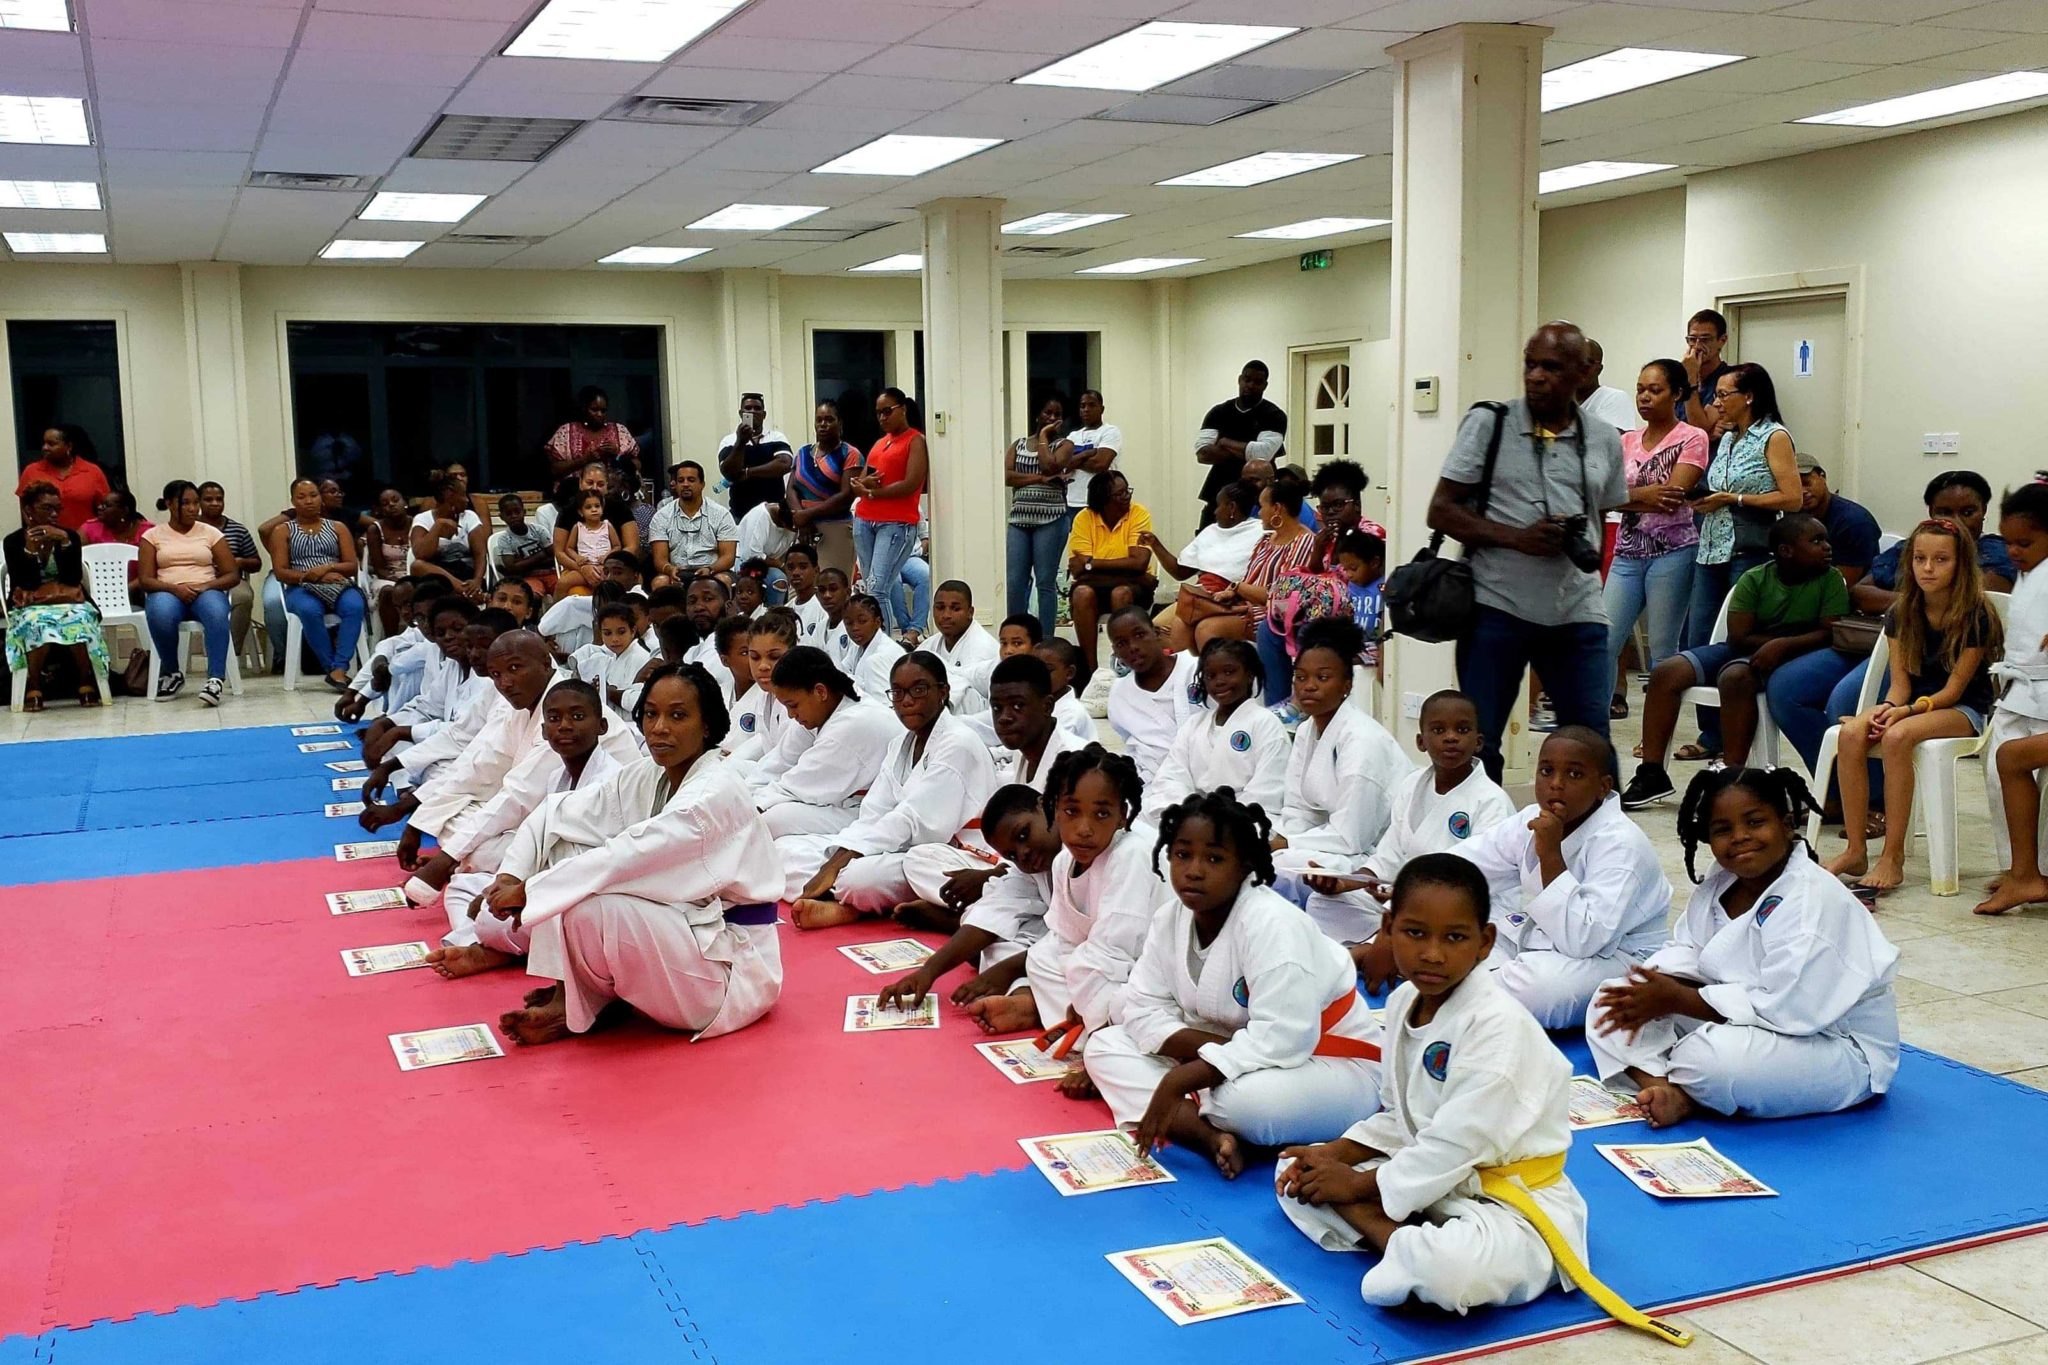 Students Excel at Karate Testing Exam